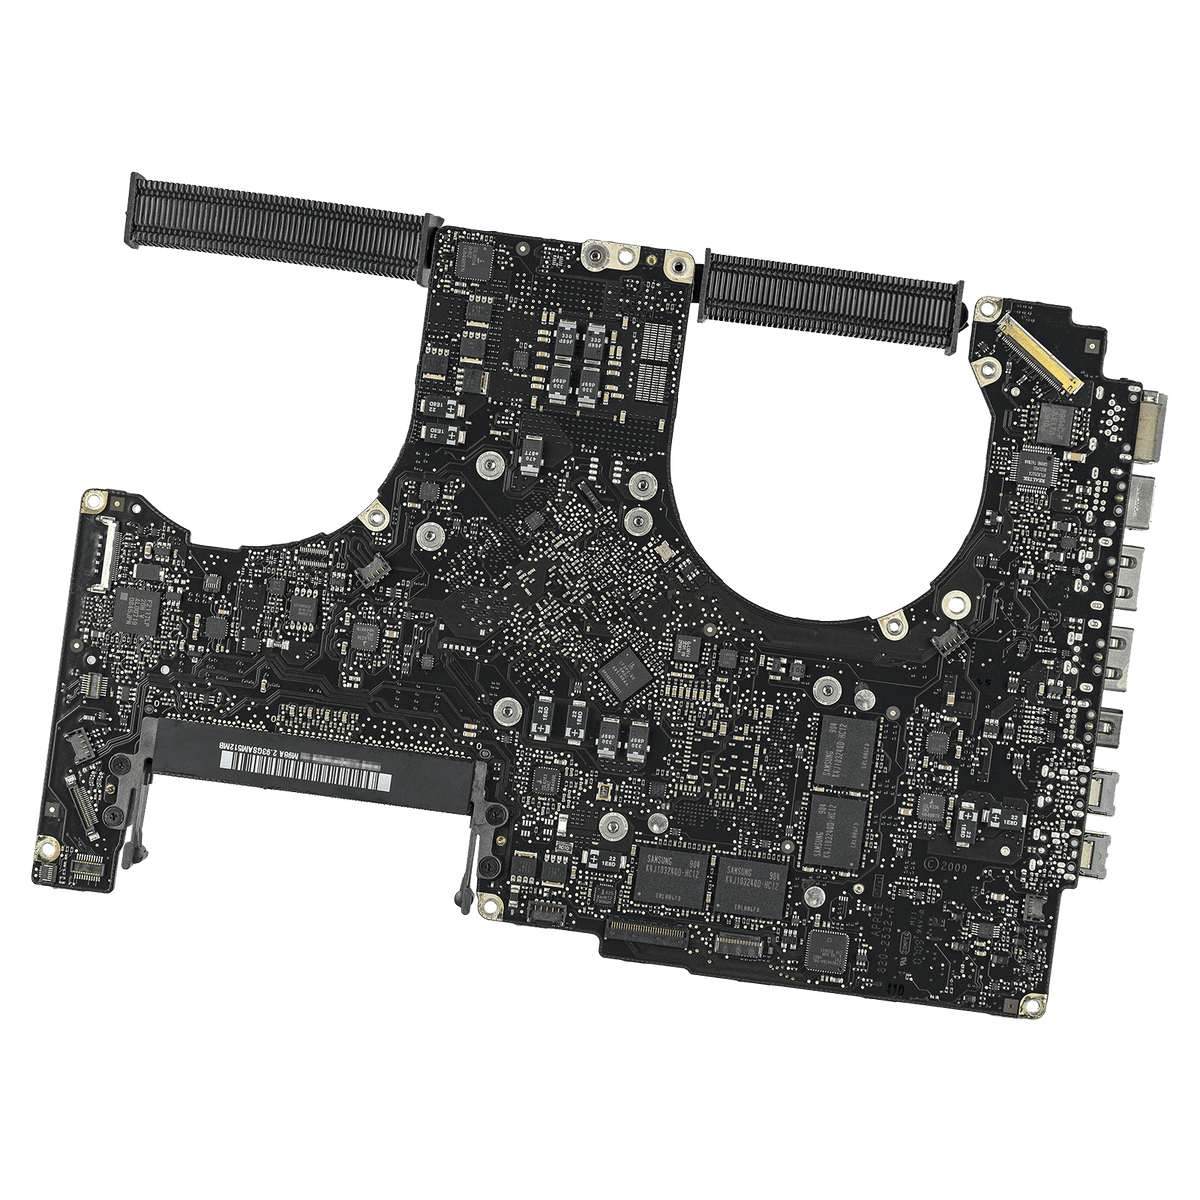 MOTHERBOARD FOR MACBOOK PRO 15" A1286 (LATE 2008 - EARLY 2009)